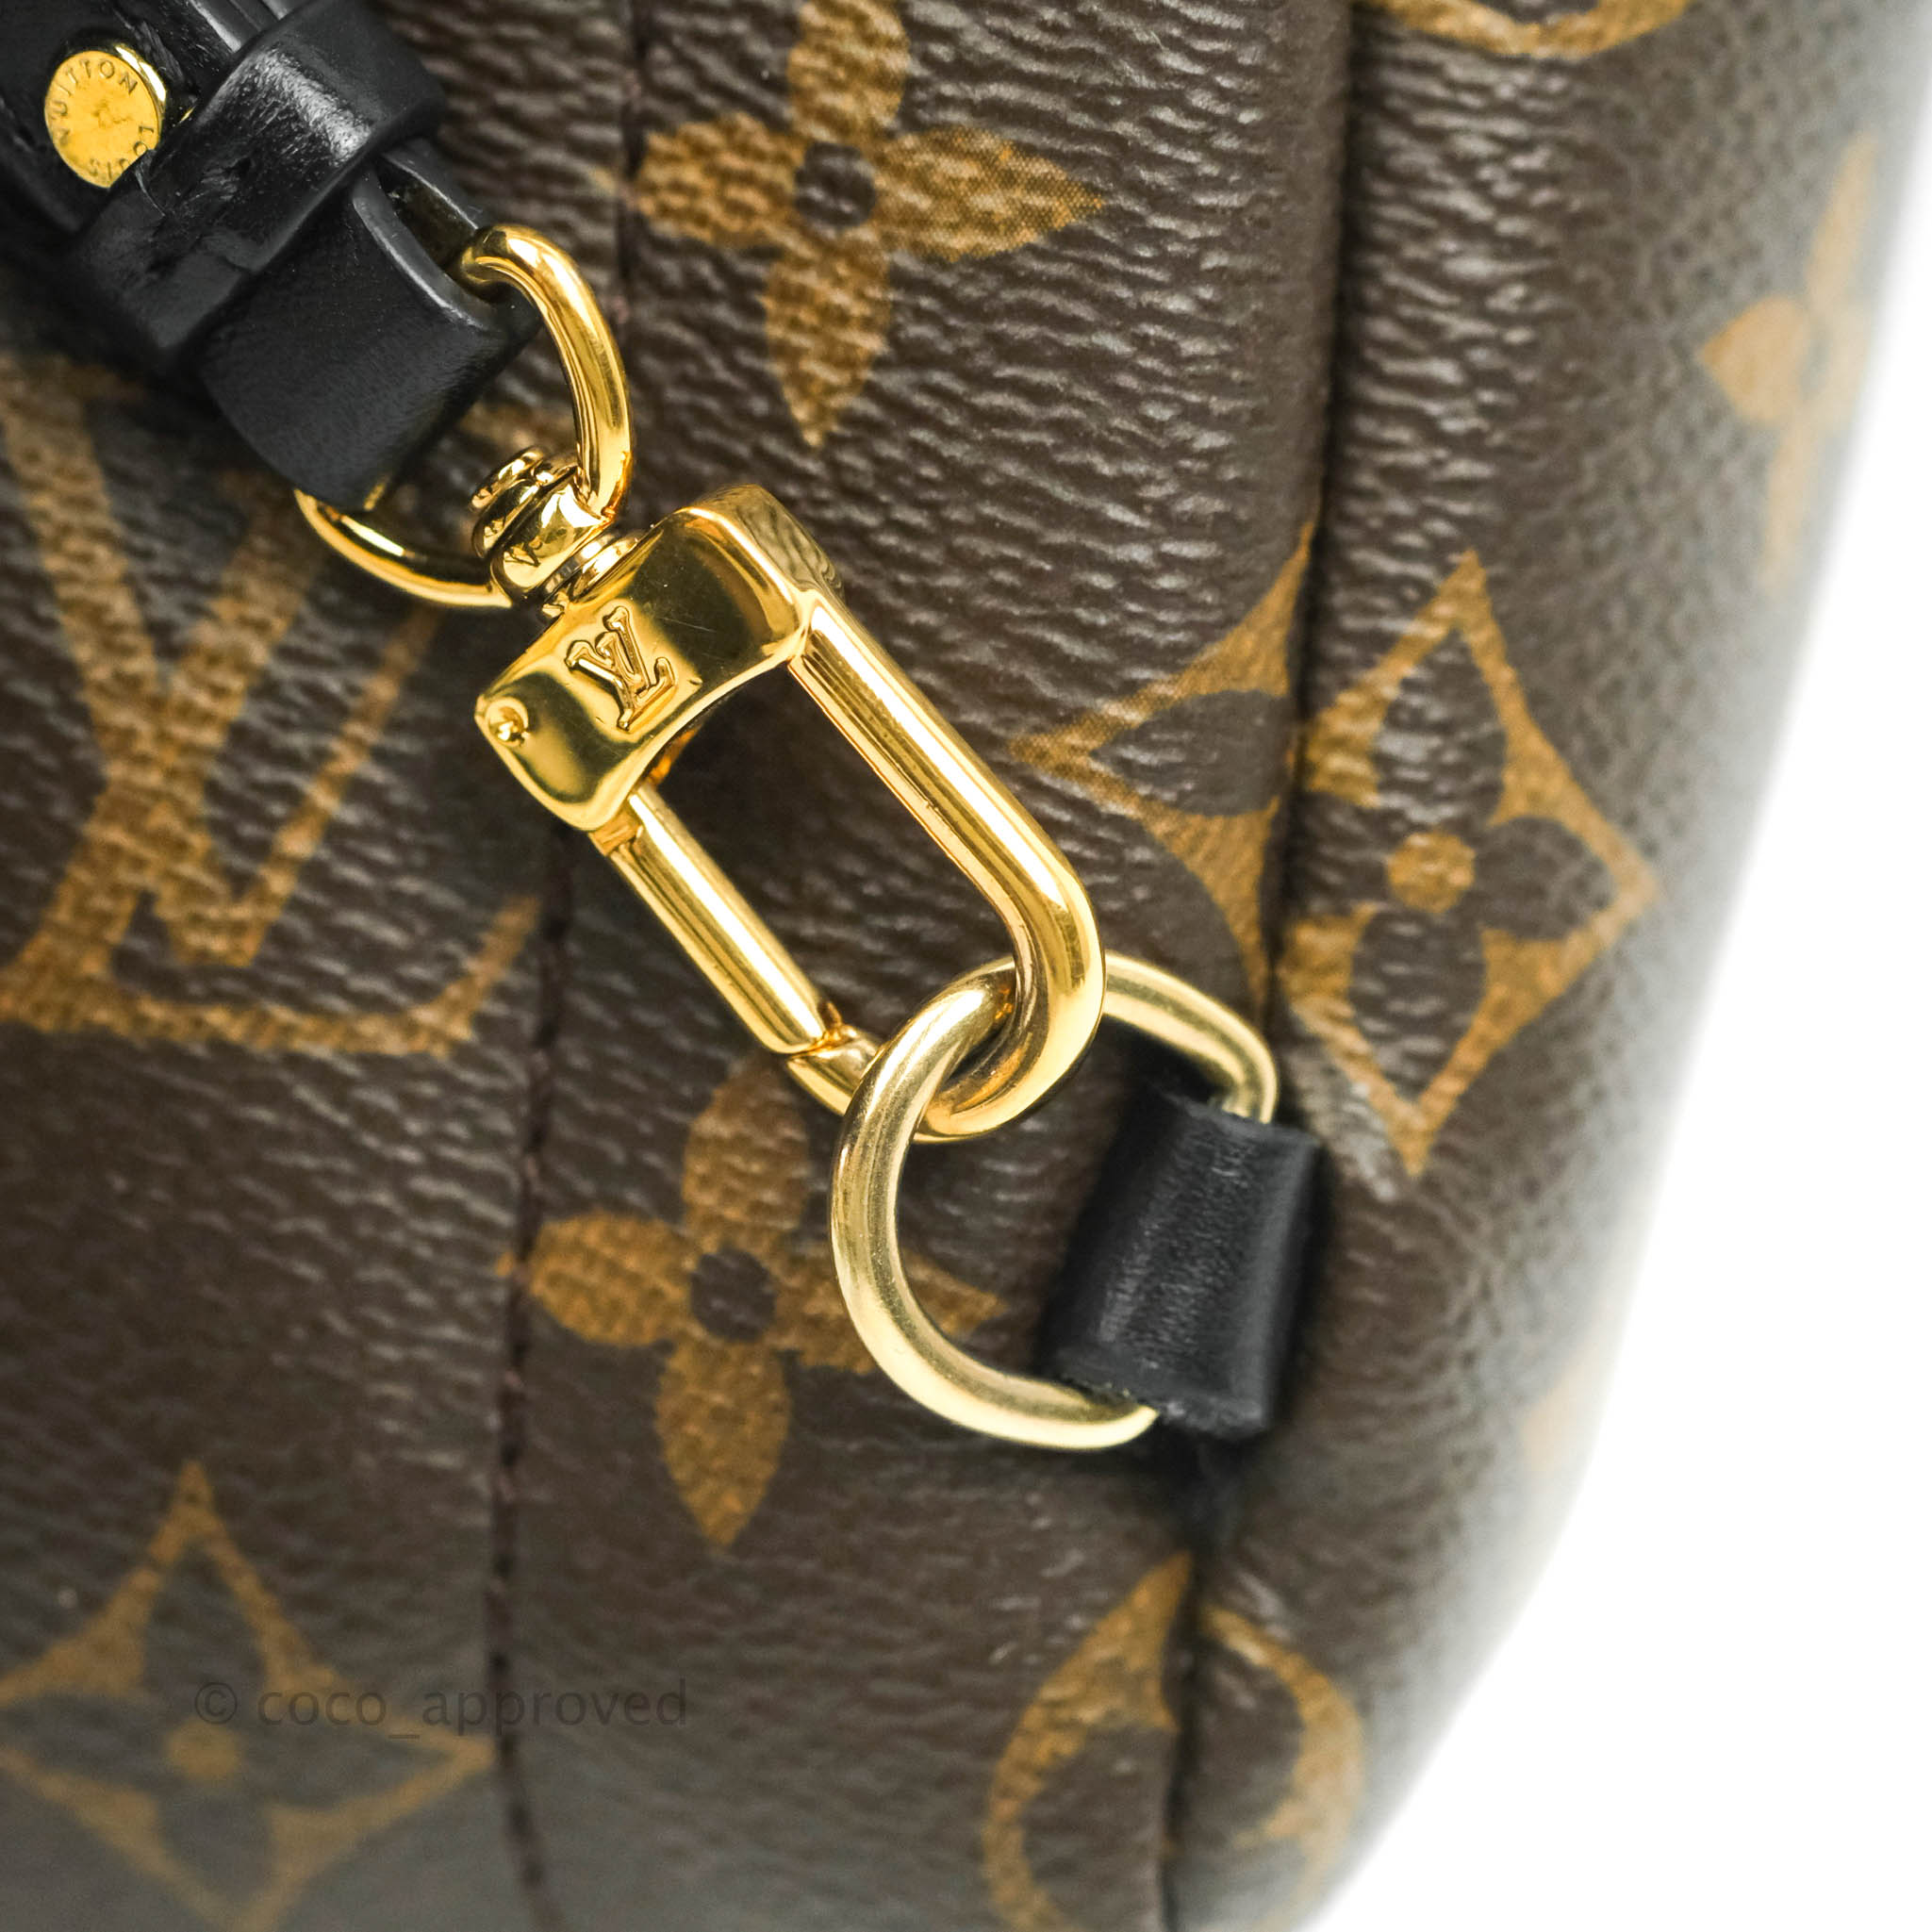 Louis Vuitton DAUPHINE bag WORTH IT? after price increase Chanel Coco  Handle Dior 30 Montaigne 